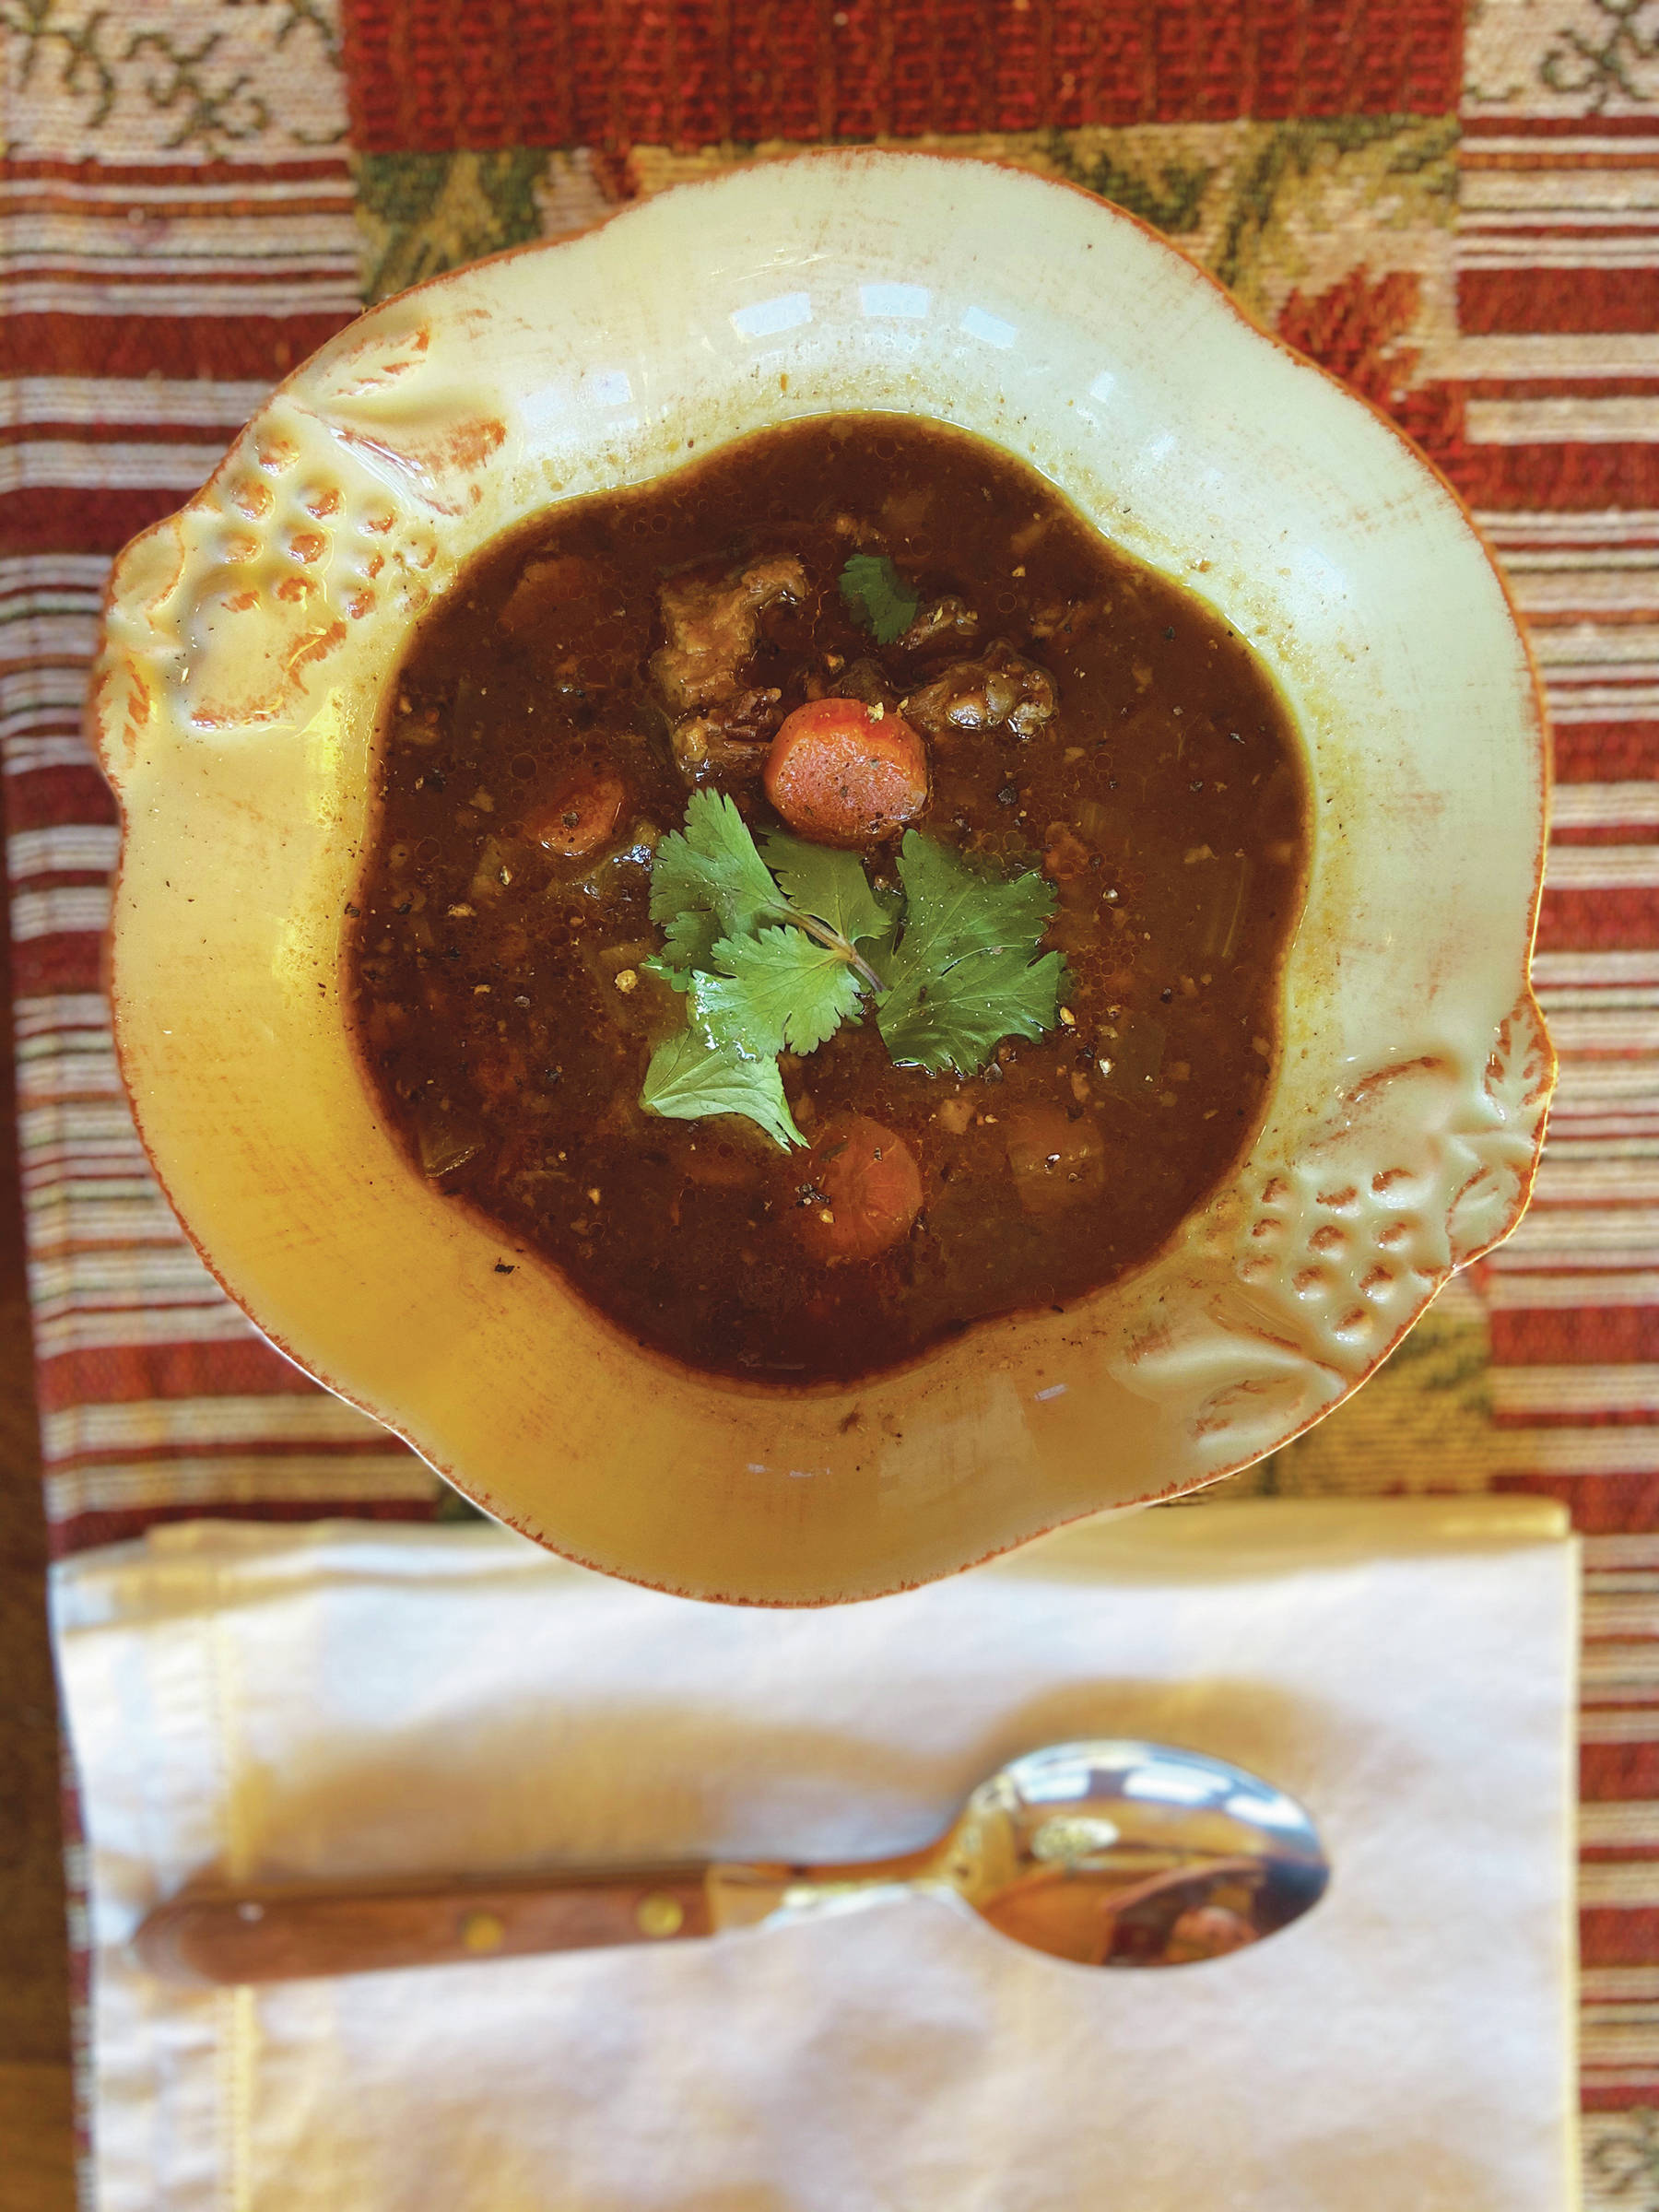 The secret ingredients in Teri Robl’s Oxtail Soup with Root Vegetables and Barley are beef oxtails, as seen here in a soup she made in her kitchen on March 10, 2020, in Homer, Alaska. (Photo by Teri Robl)